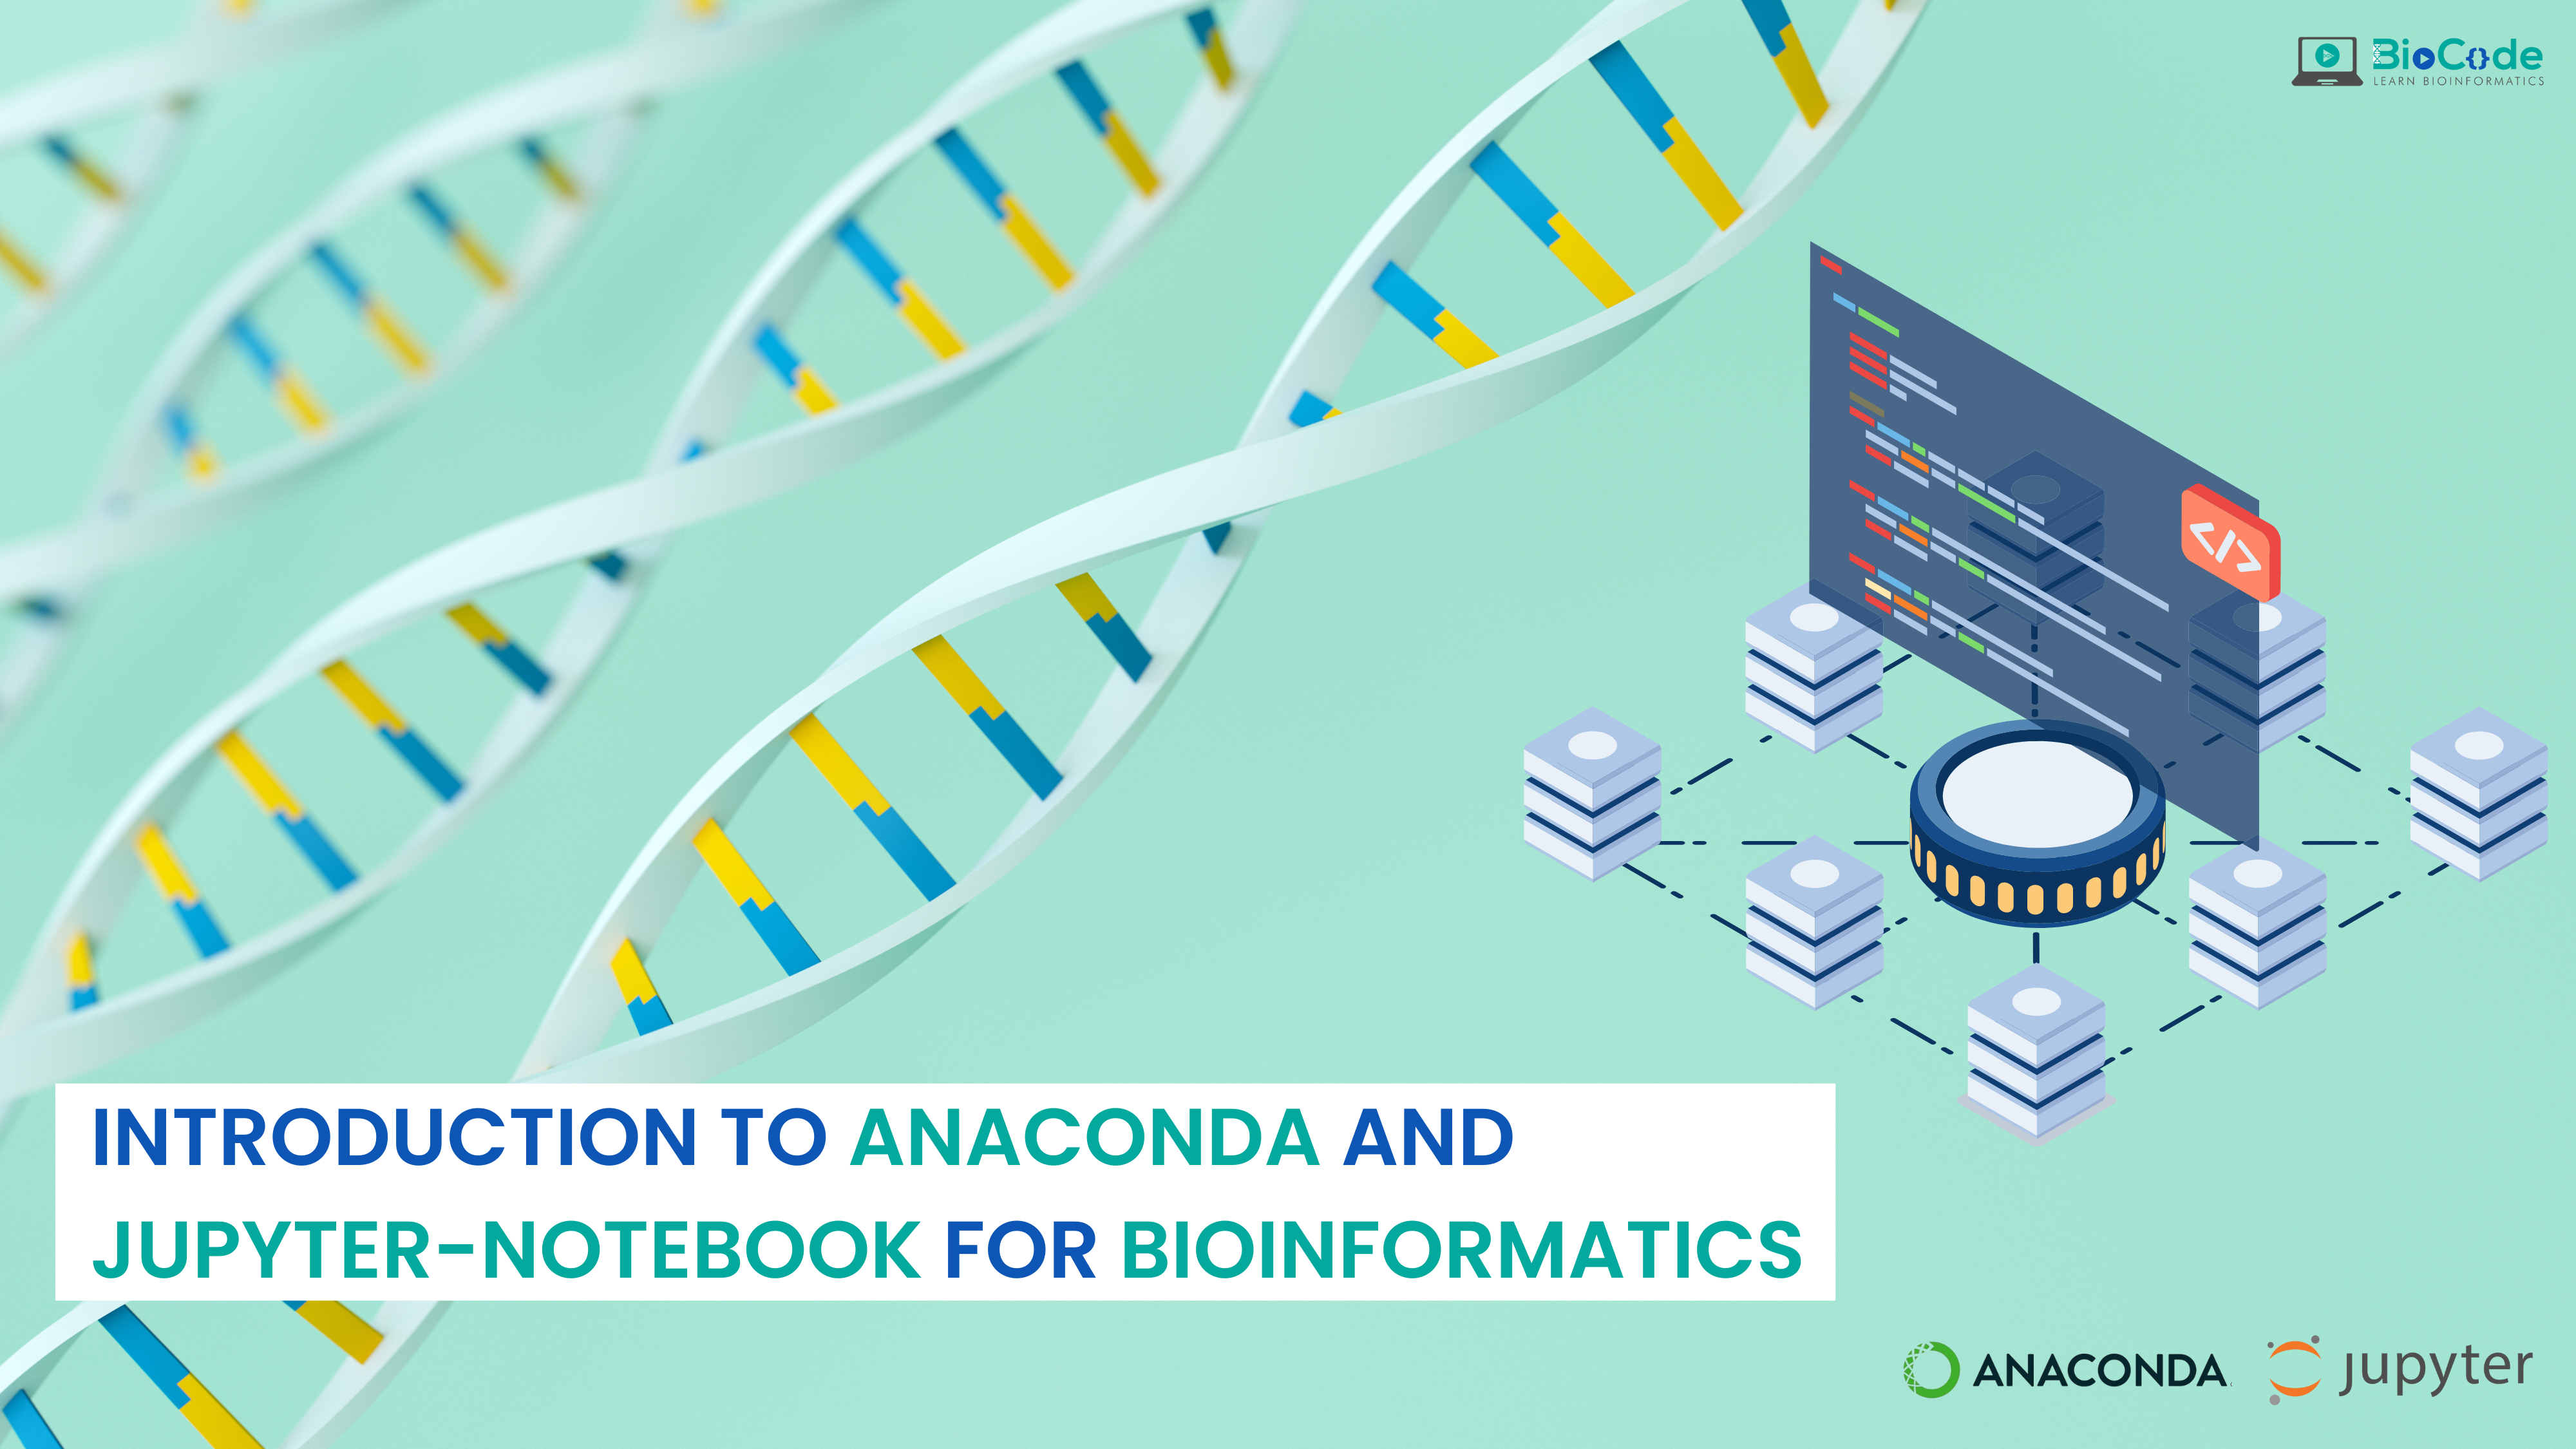 Introduction to Anaconda and Jupyter-Notebook for Bioinformatics